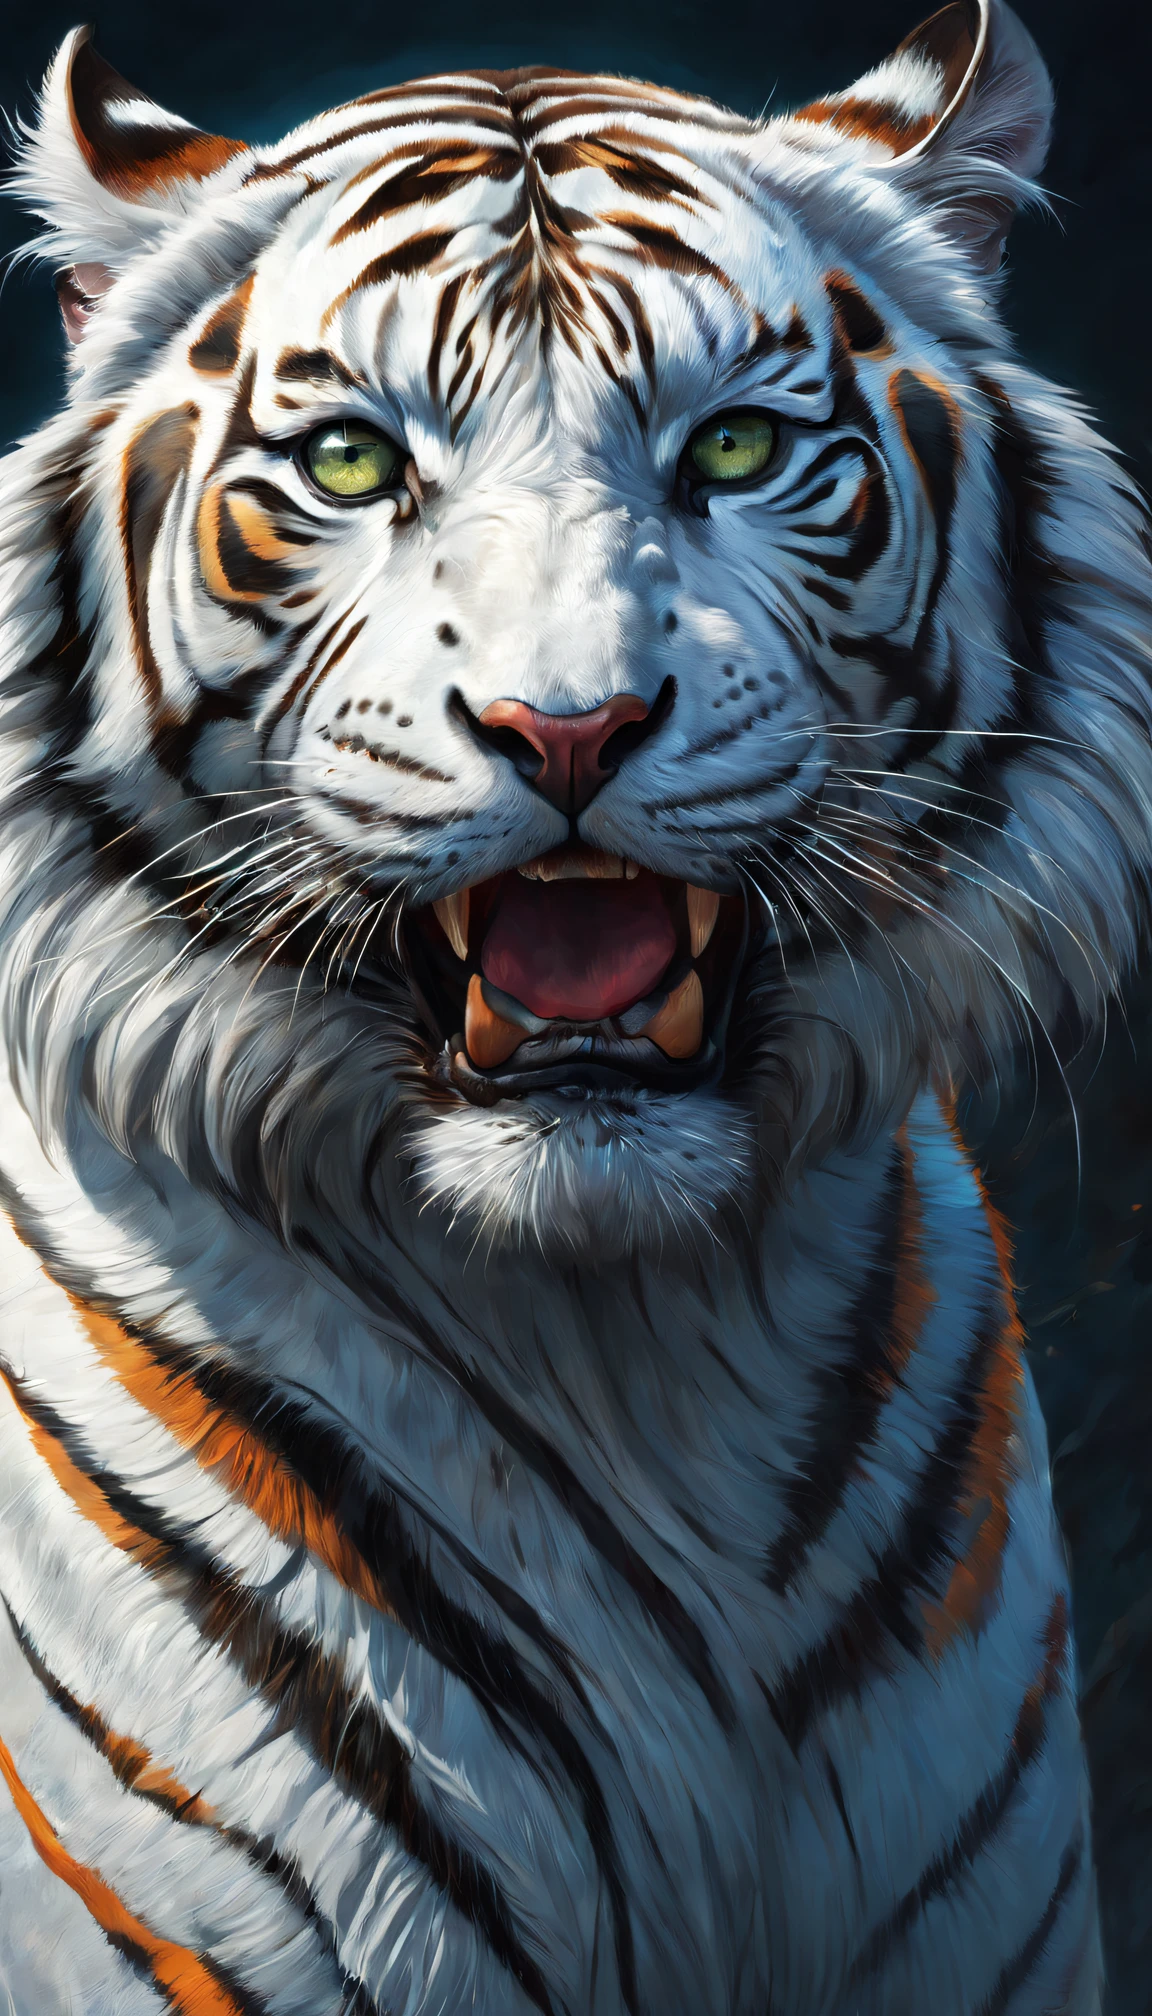 Best quality at best,ultra - detailed,actual,vivd colour,White tiger and human hybrid,sportrait,illustratio,Focus sharp,Vibrant background,Delicate fur,Expressive eyes,Intense expression,Striking pose,majestic feeling,Stylized rendering,Beautiful contrast,Thick lines,Rich textures,a hint of fantasy,Unique character design,Colorful palette,dynamic compositions,dramatic lights,animal attributes,Emotional intensity,Lively brushstrokes,Strong sense of presence,noble existence,Powerful aura,Wonderful details,lifelike features,Surreal elements,a captivating gaze,condescending,Hypnotic eyes,Enigmatic Atmosphere,Vibrant brushstrokes,perfect anatomia,symbolic representation,heroic figure,Impressive figure,vivid imagination,awe-inspiring,Unforgettable artwork.